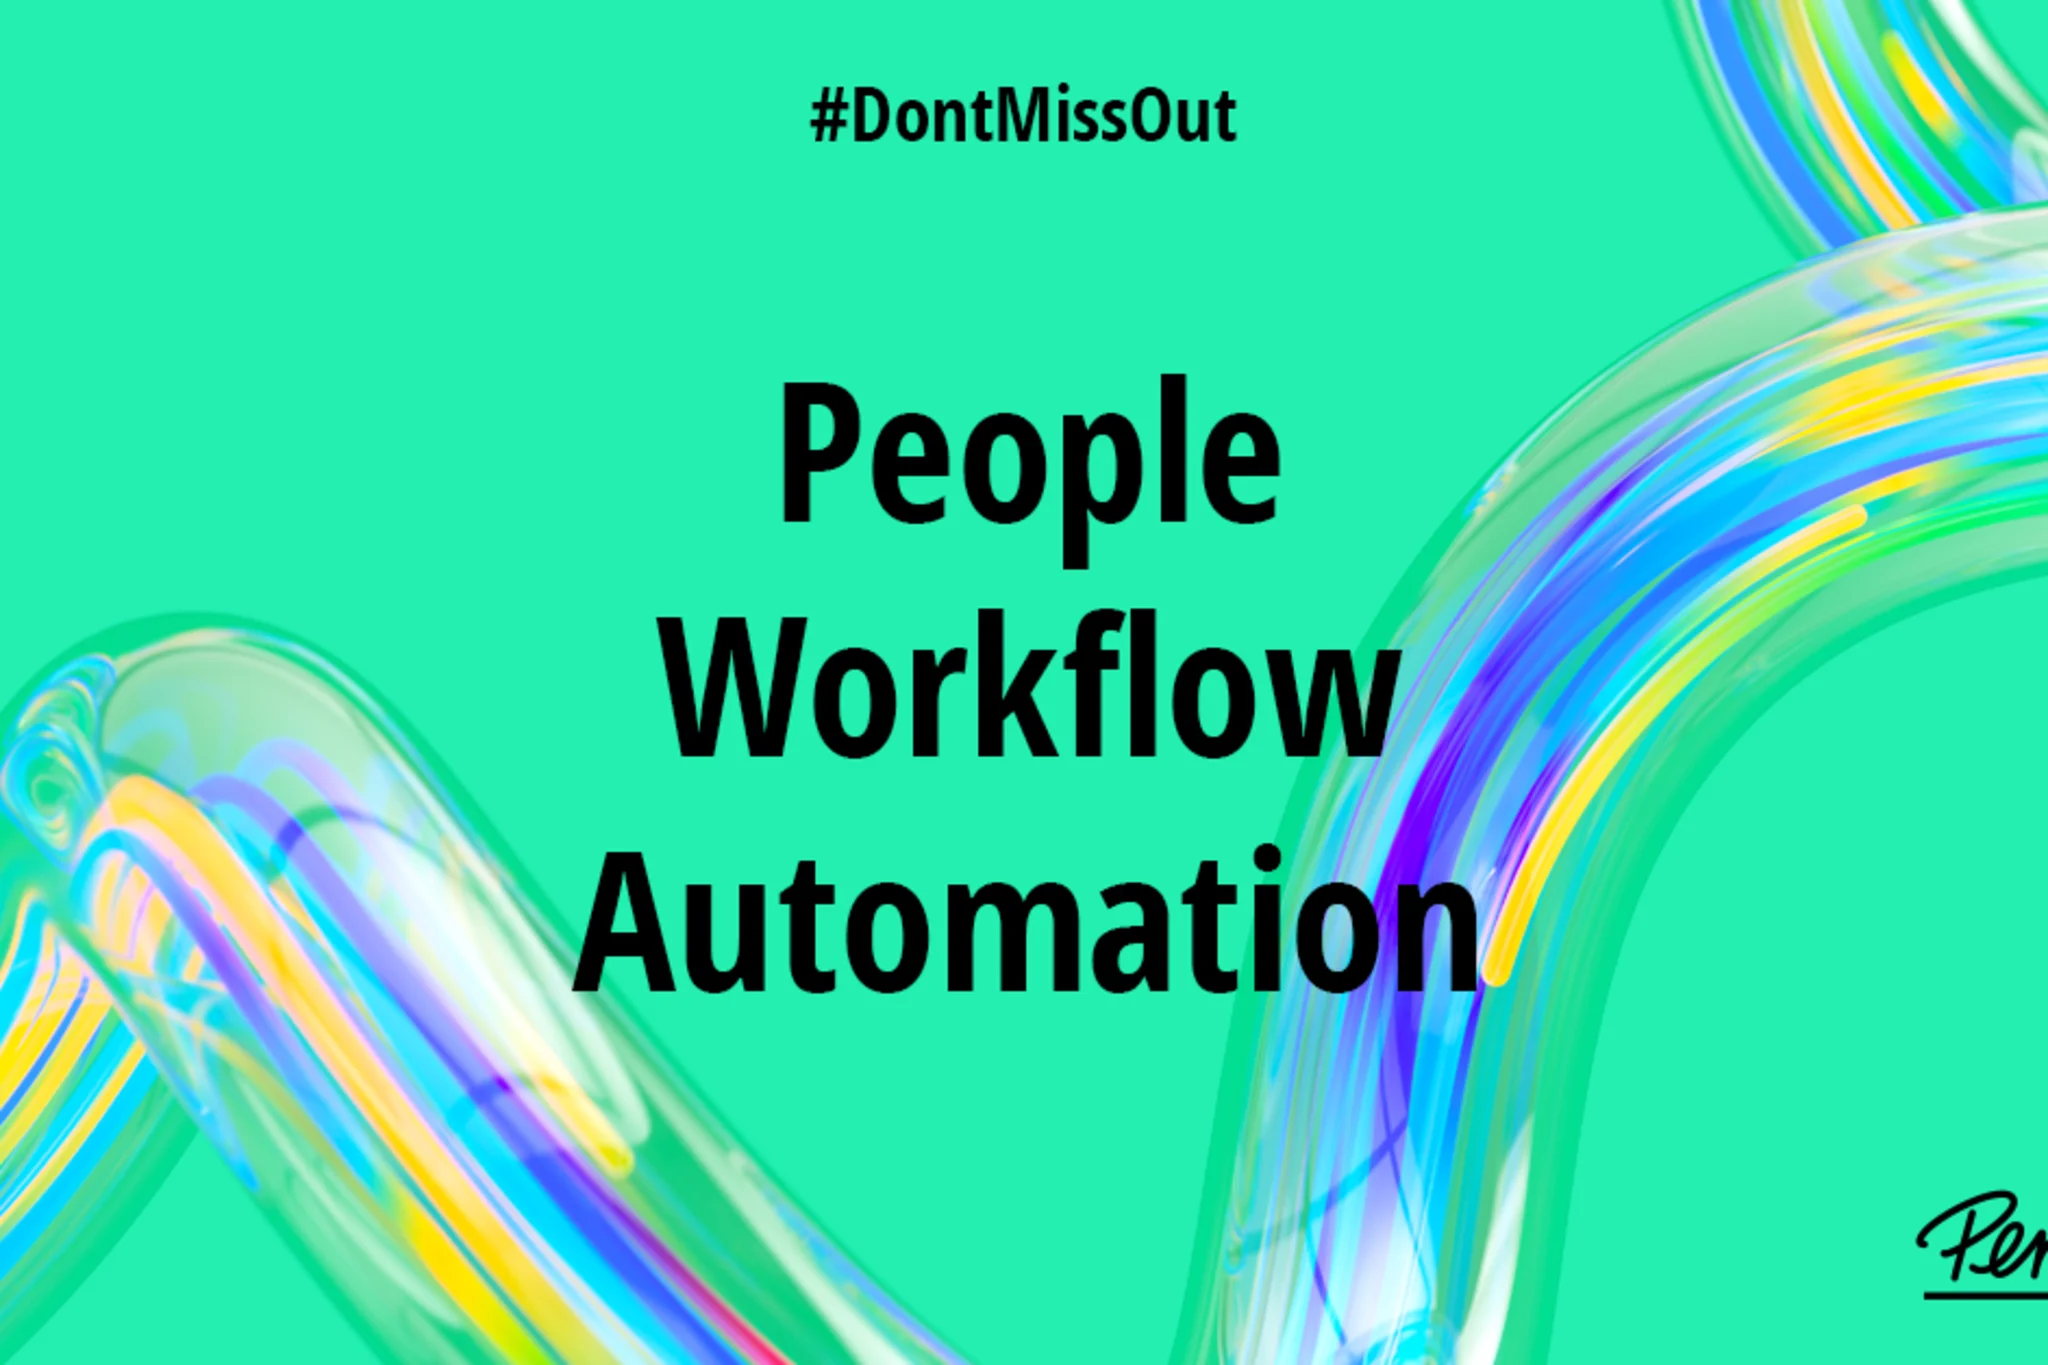 People Workflow Automation #DontMissOut